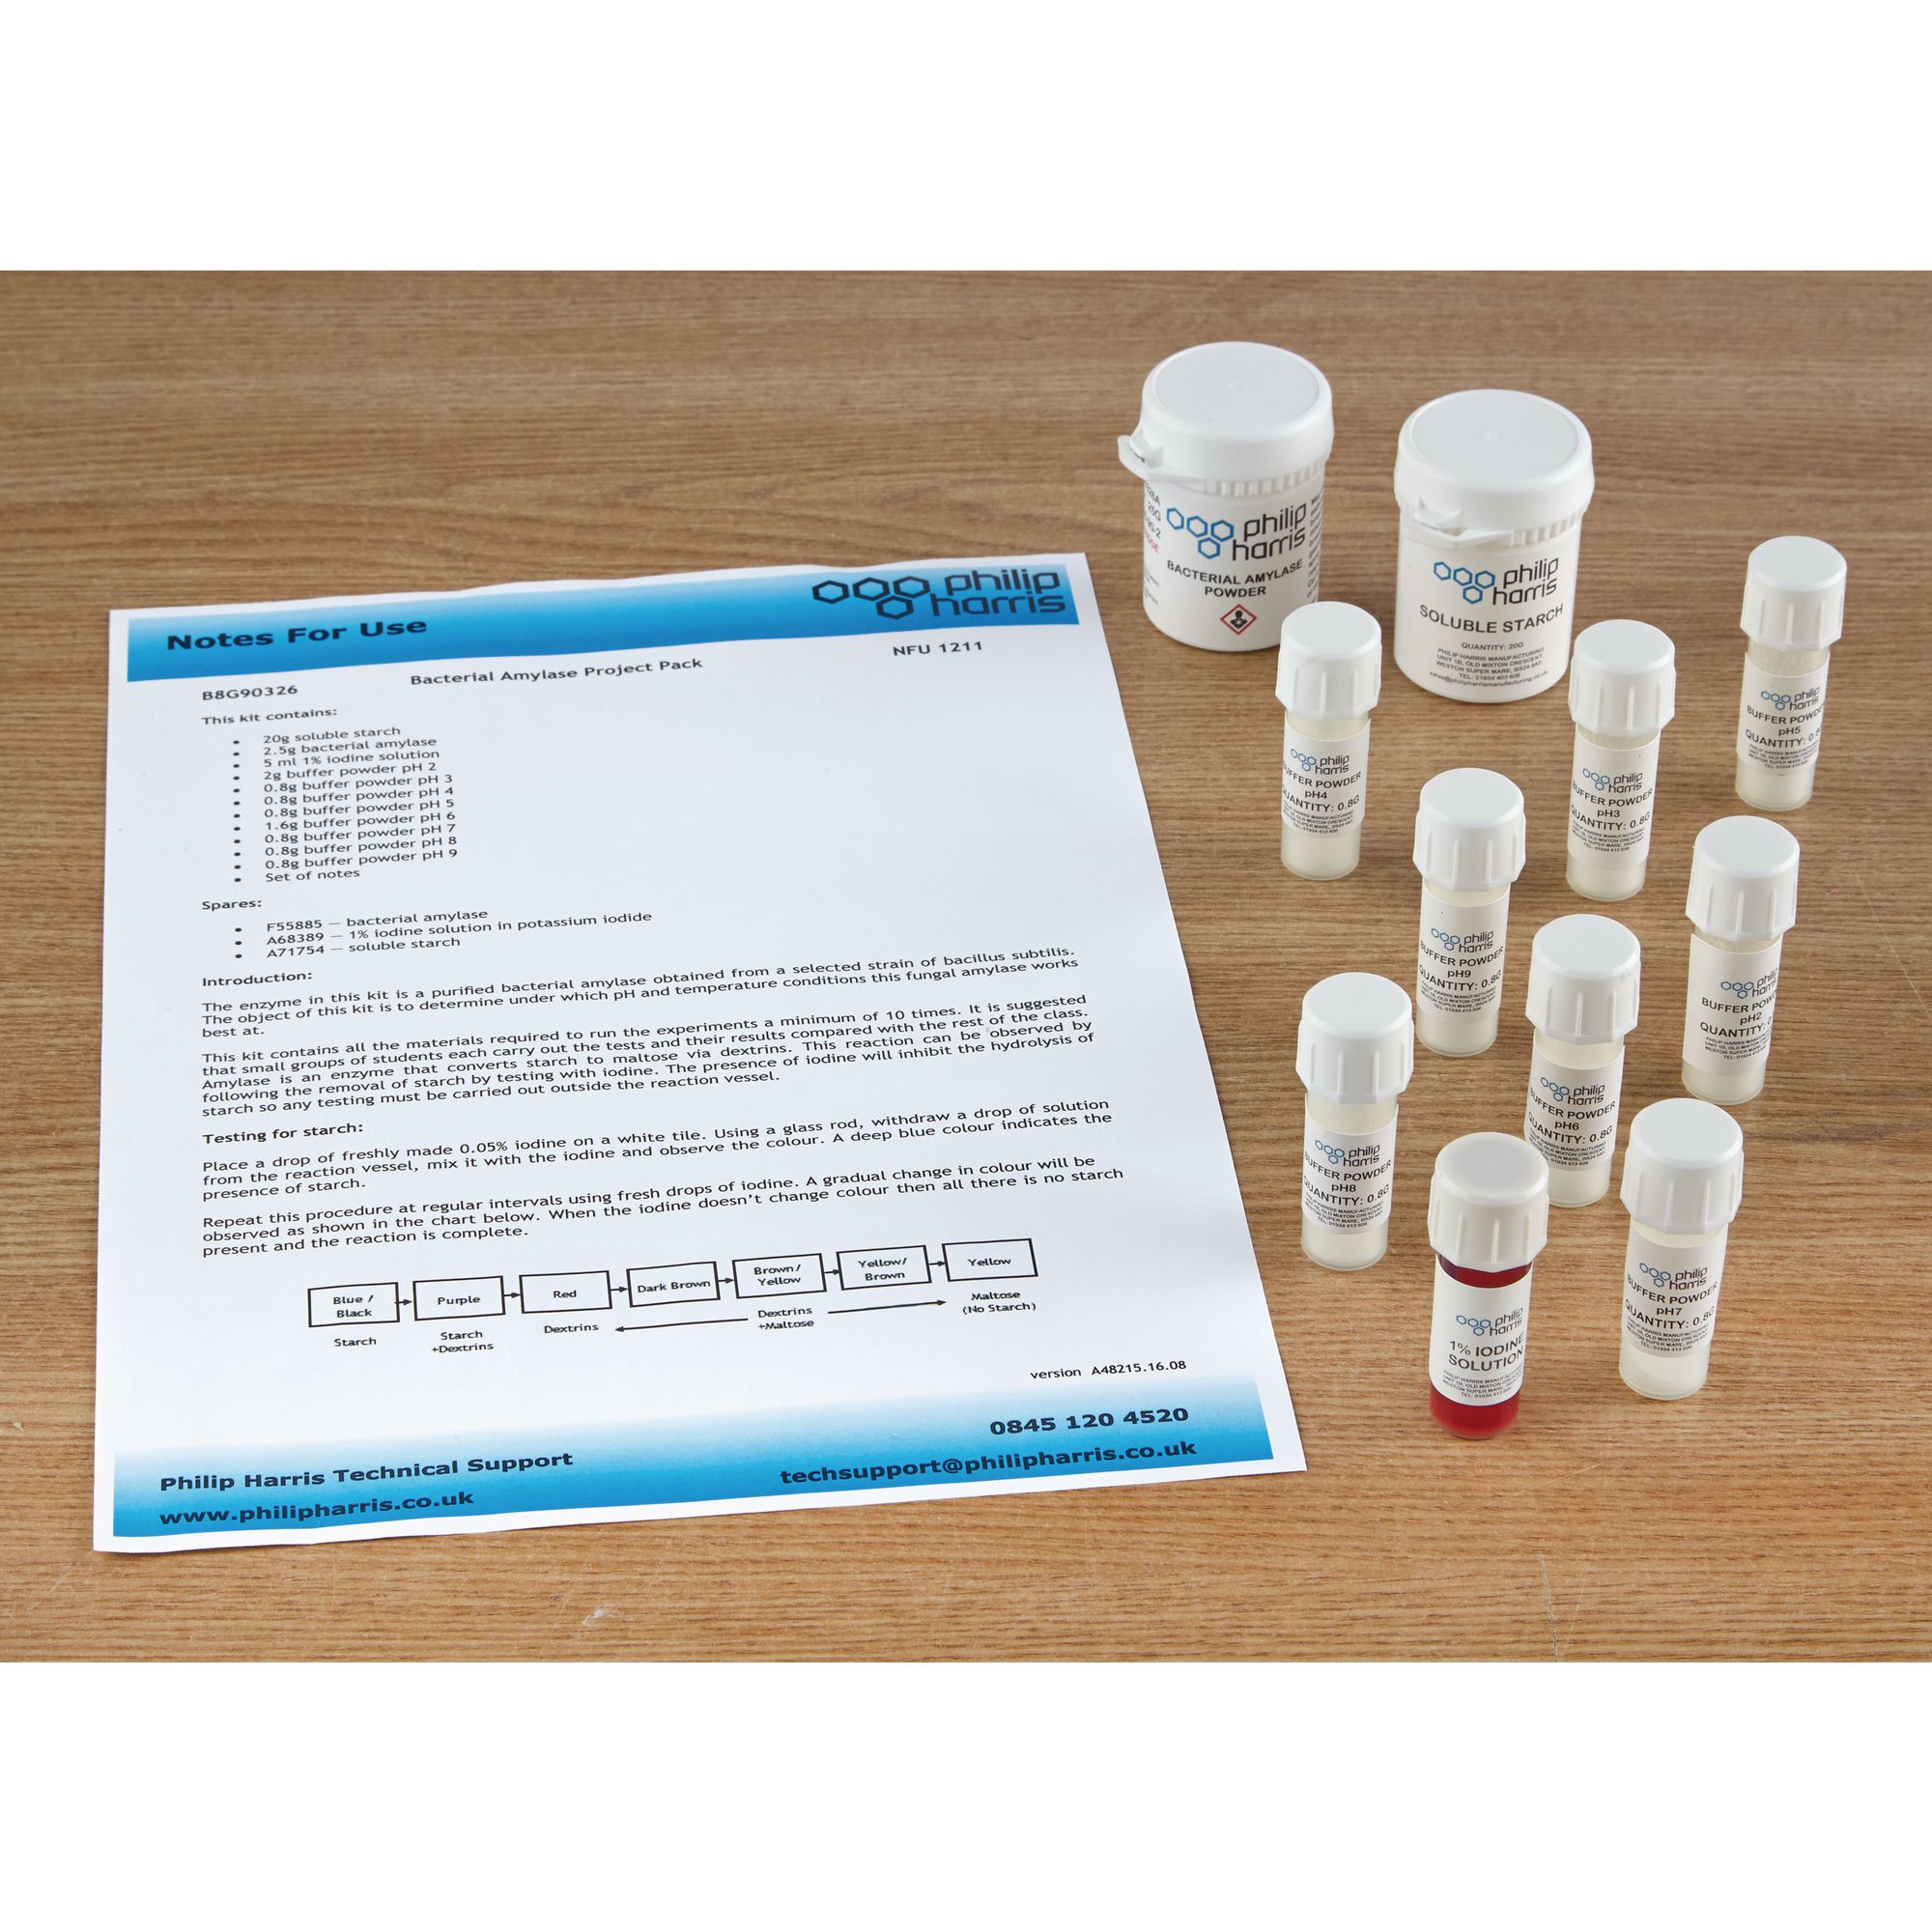 Bacterial Amylase Project Pack